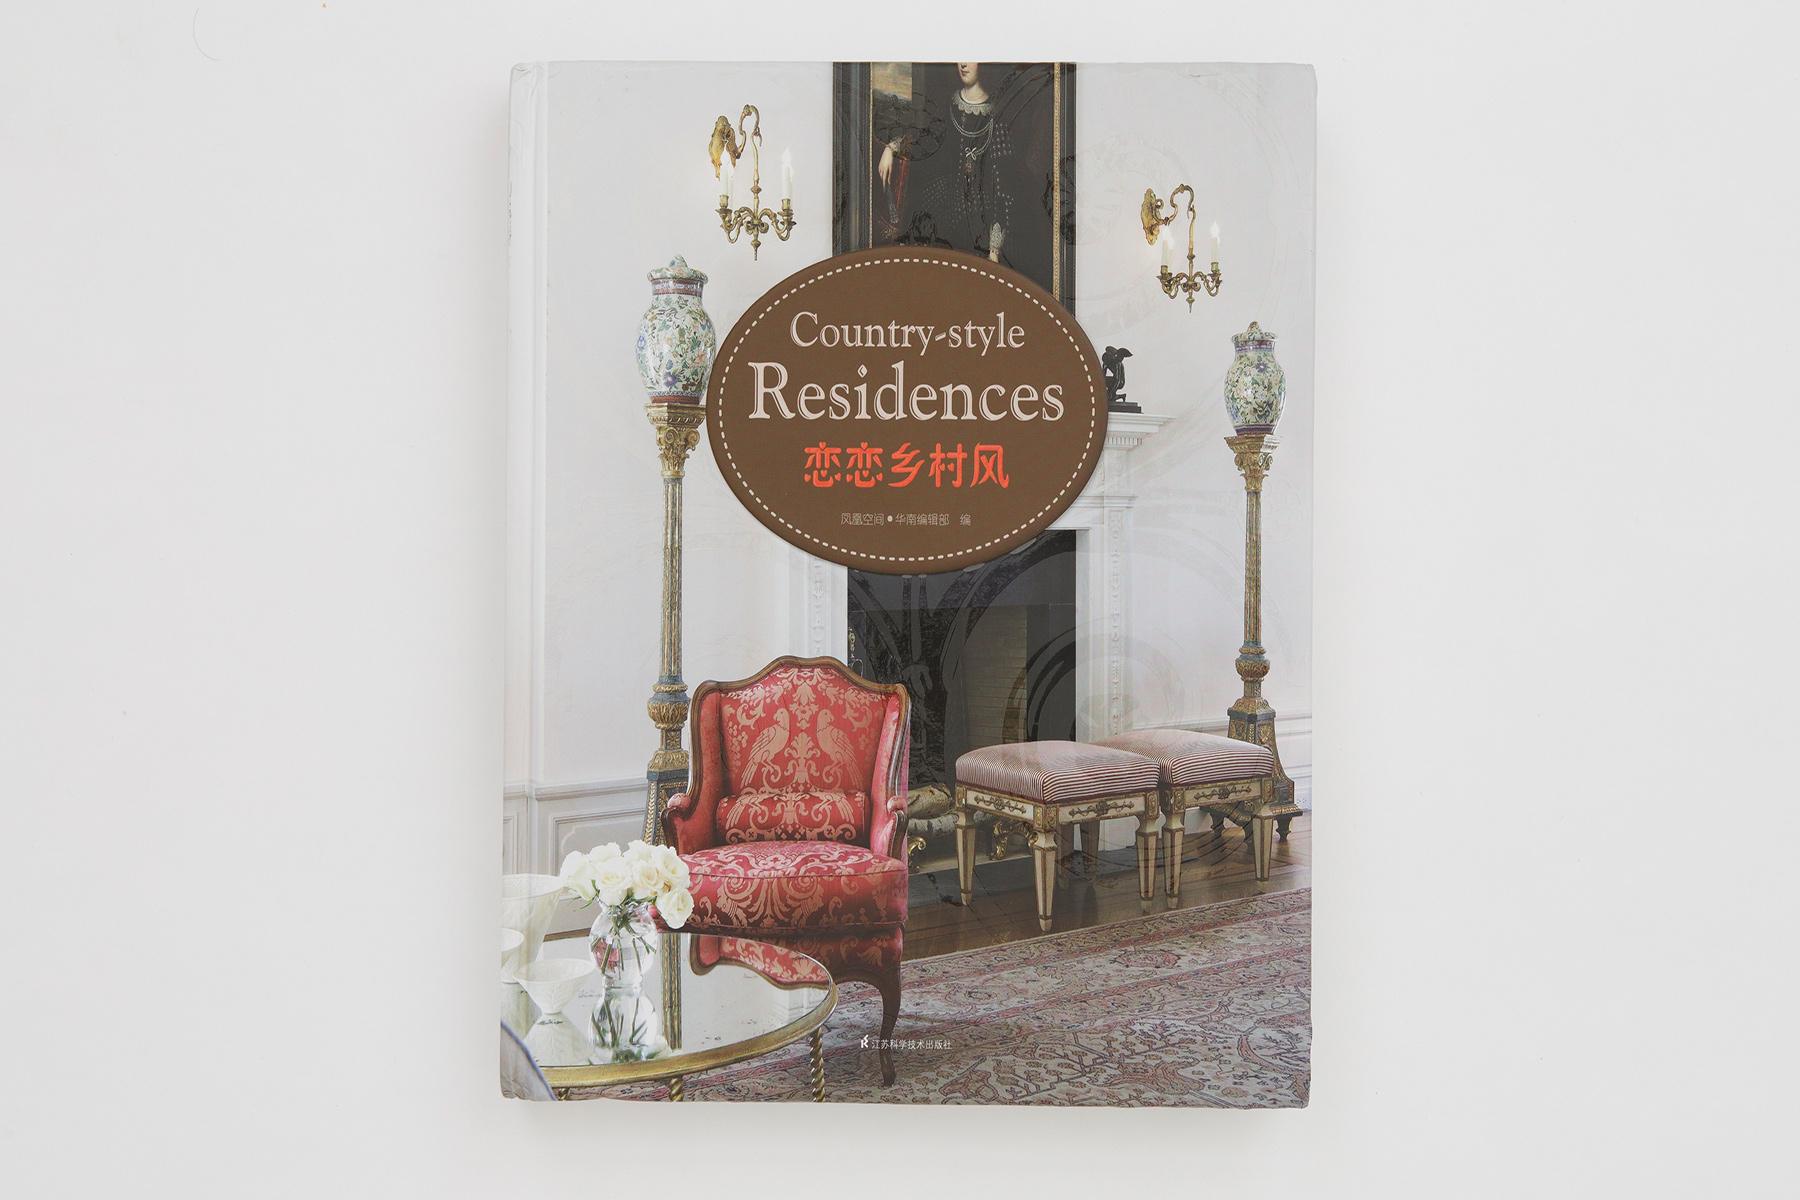 Country-Style Residences is a compendium of the finest contemporary work in the country style spanning categories of British, French, American, and Modern design.